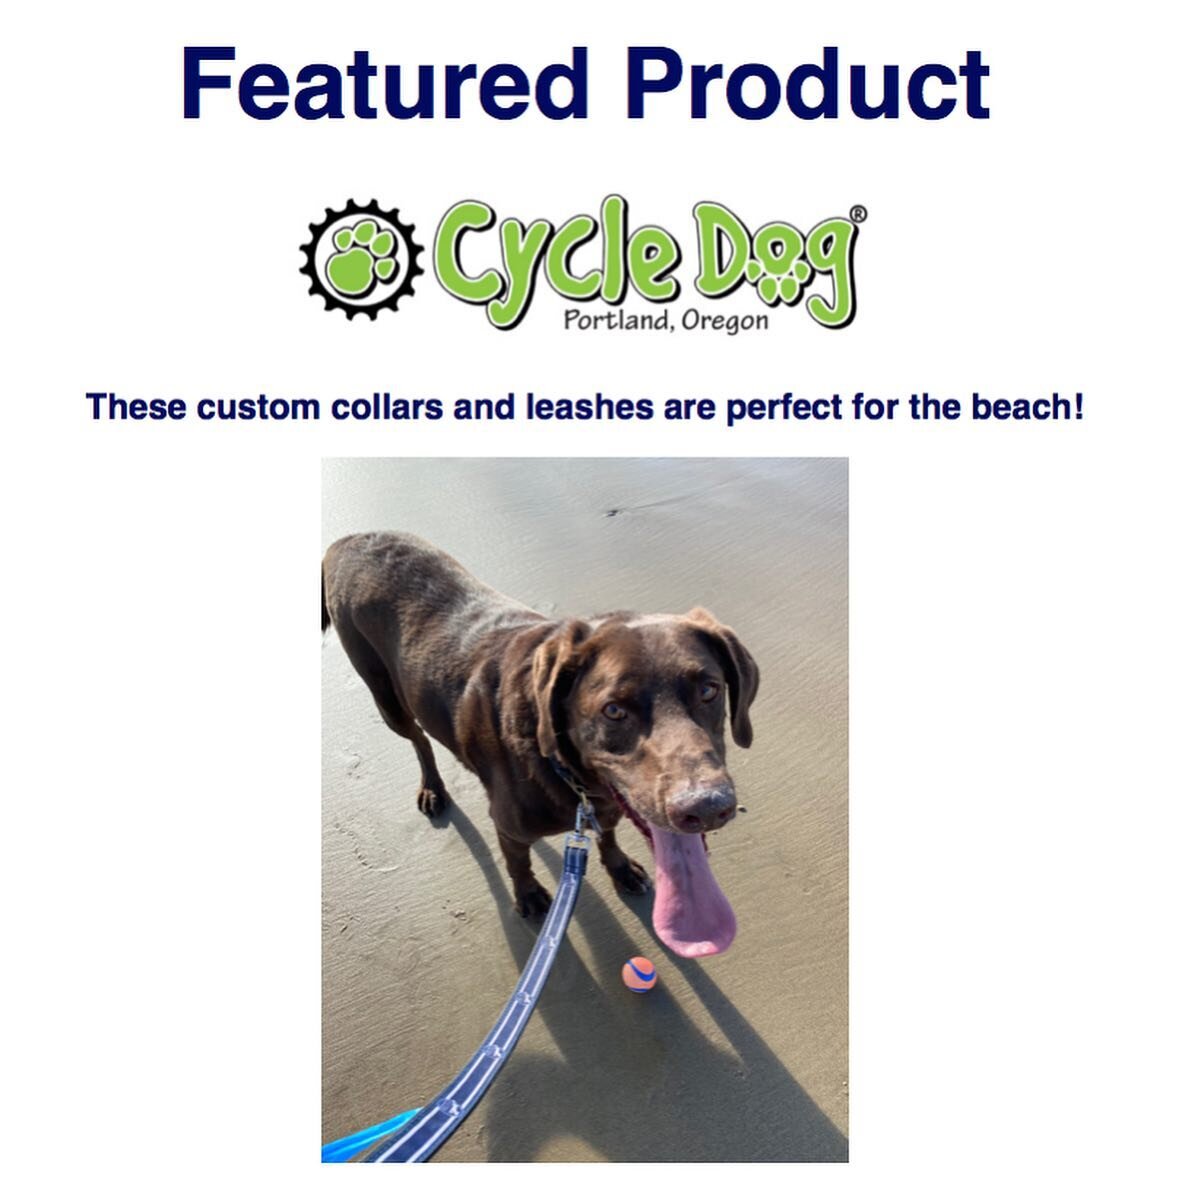 Our featured product of the month are our custom @cycledog collars and leashes!! These are PERFECT for the beach: they&rsquo;re waterproof AND have a built in bottle opener! What more could you ask for?